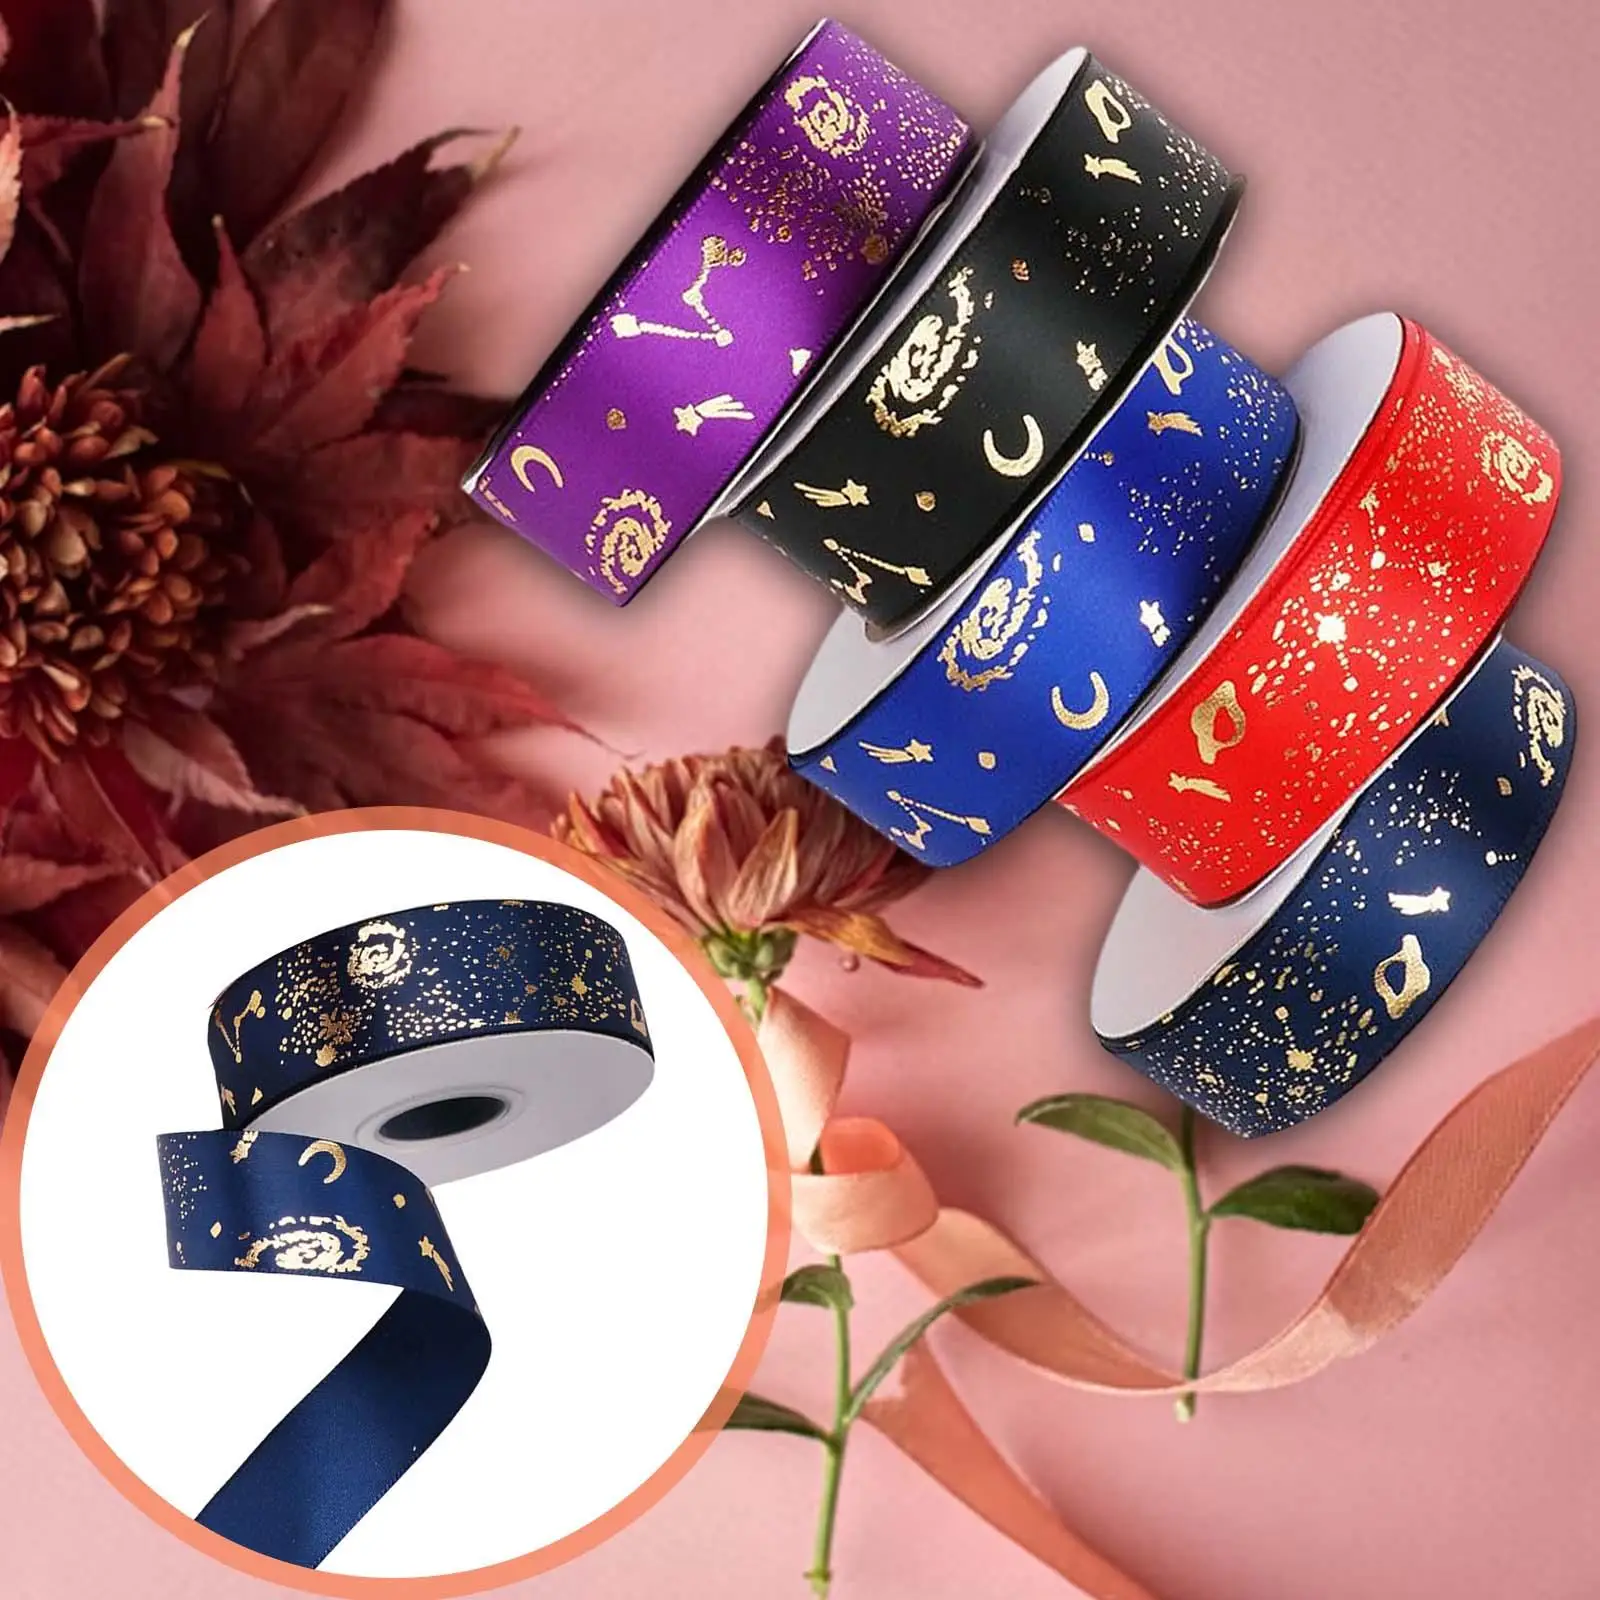 5x Satin Ribbon 24 Yards Each Roll Wedding Favors Decorative Lanyards for birthday New Year Home Decor Party Decor